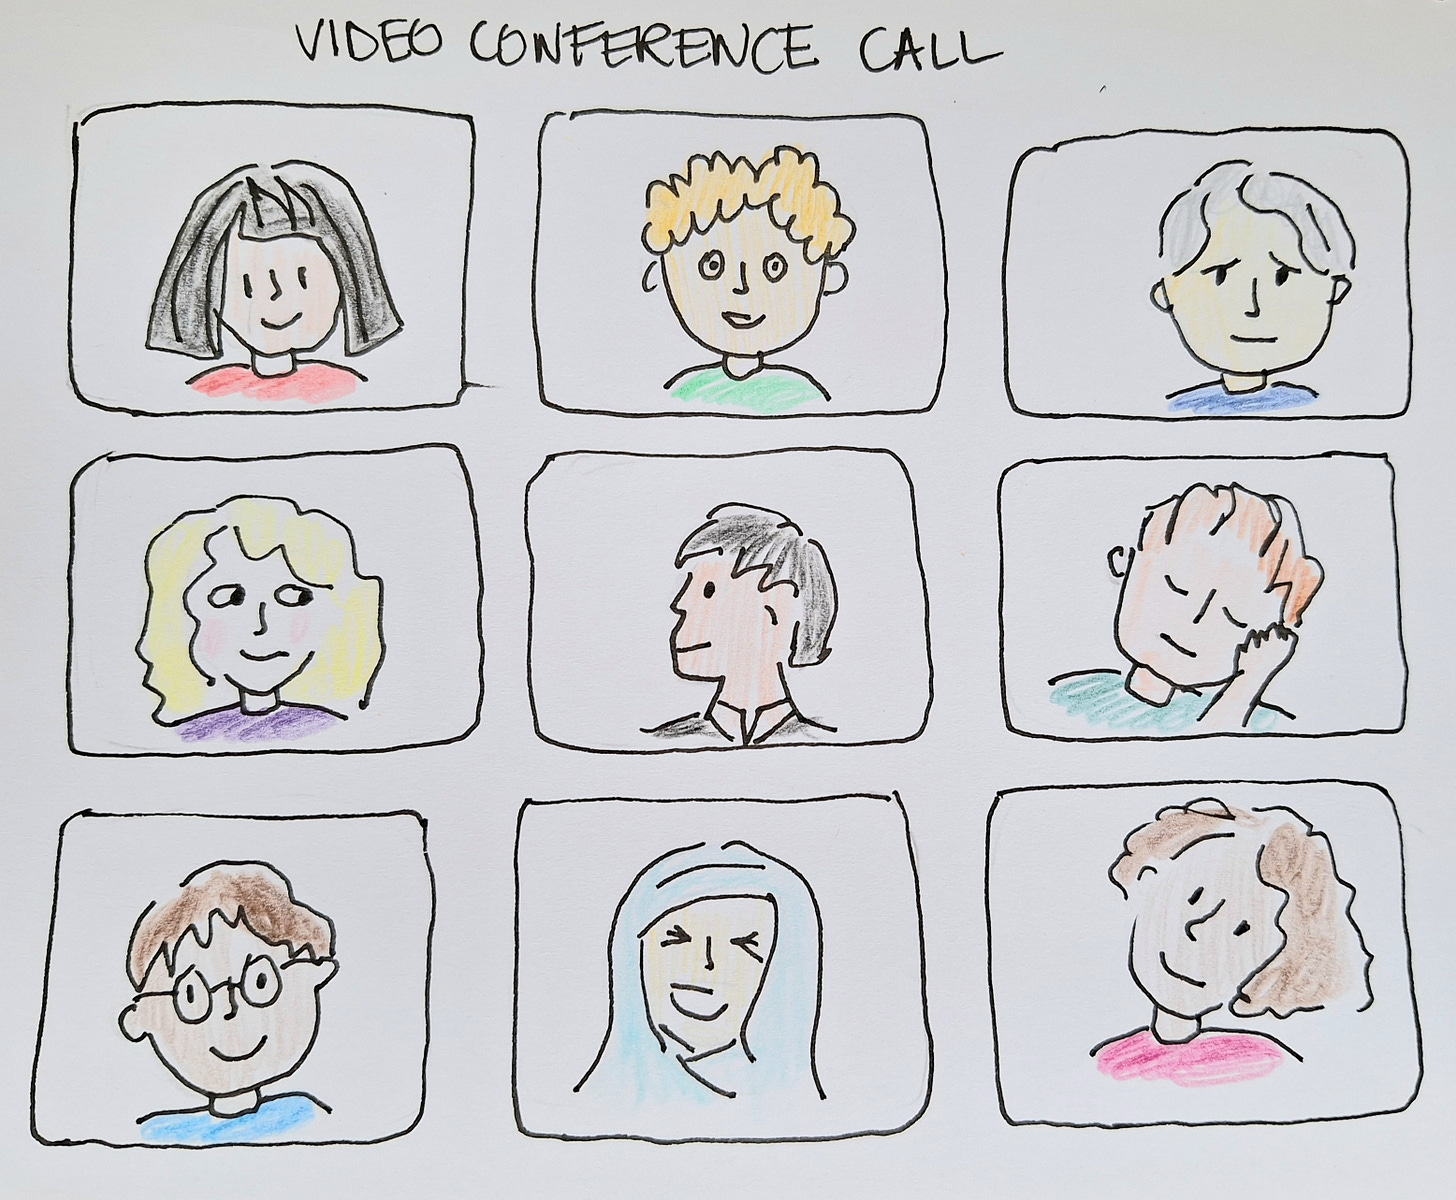 Cartoon sketch of a diverse group of people on a conference call.  Each has a different expression and body language.